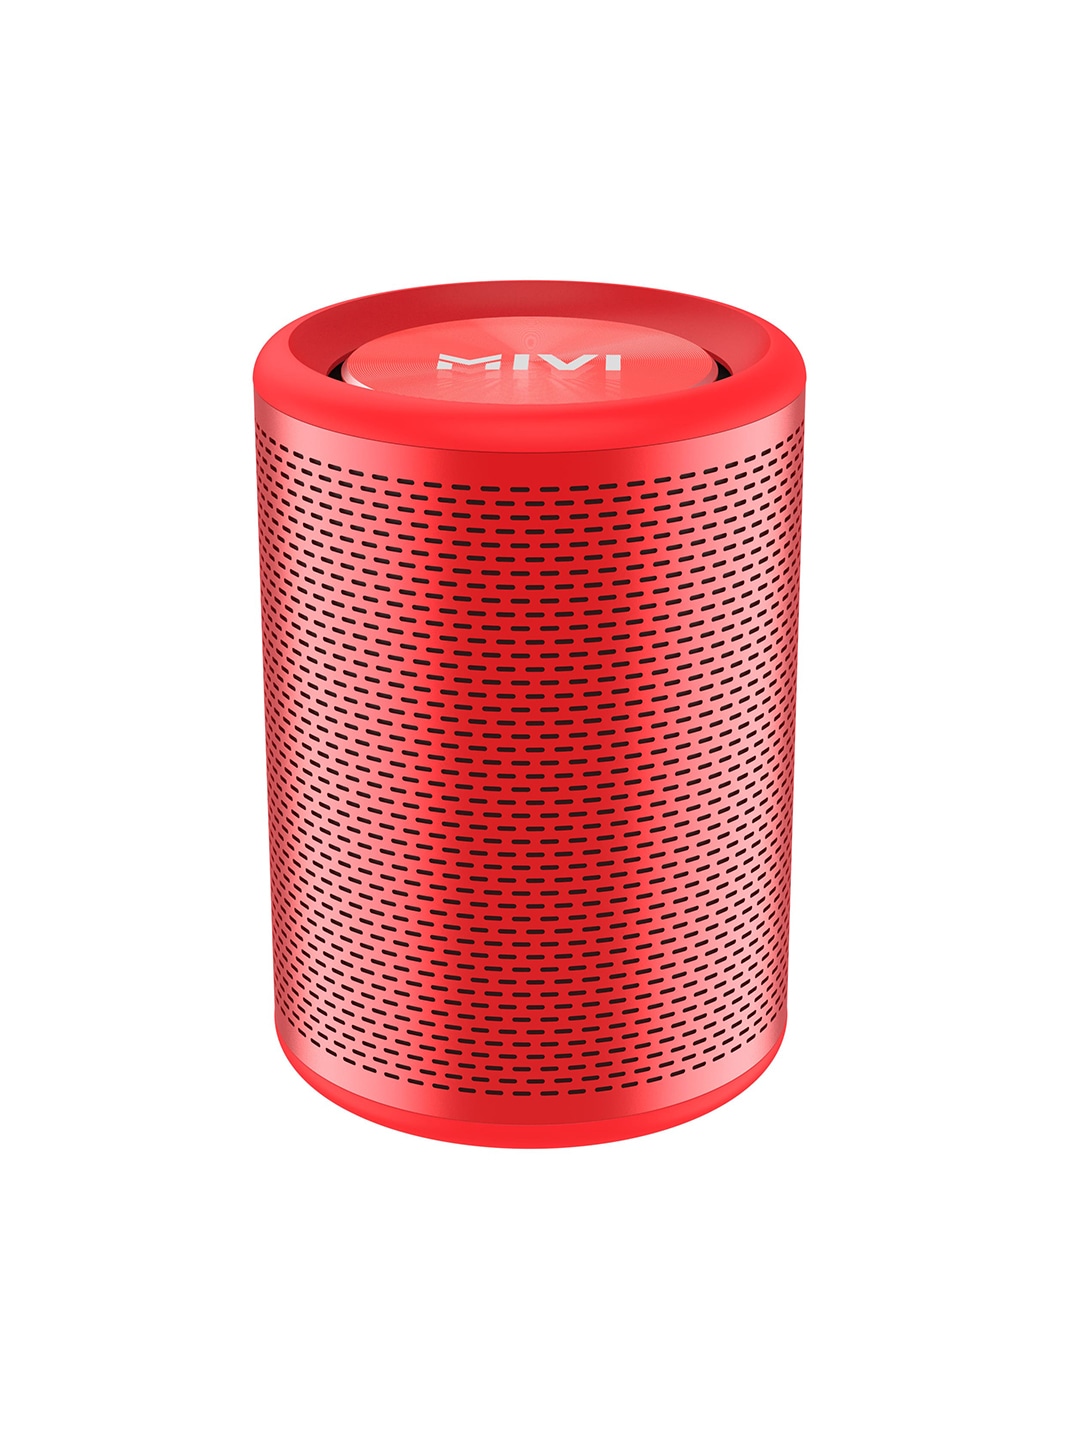 Mivi Octave 3 Wireless Bluetooth Speaker, 16W, (Red) Price in India